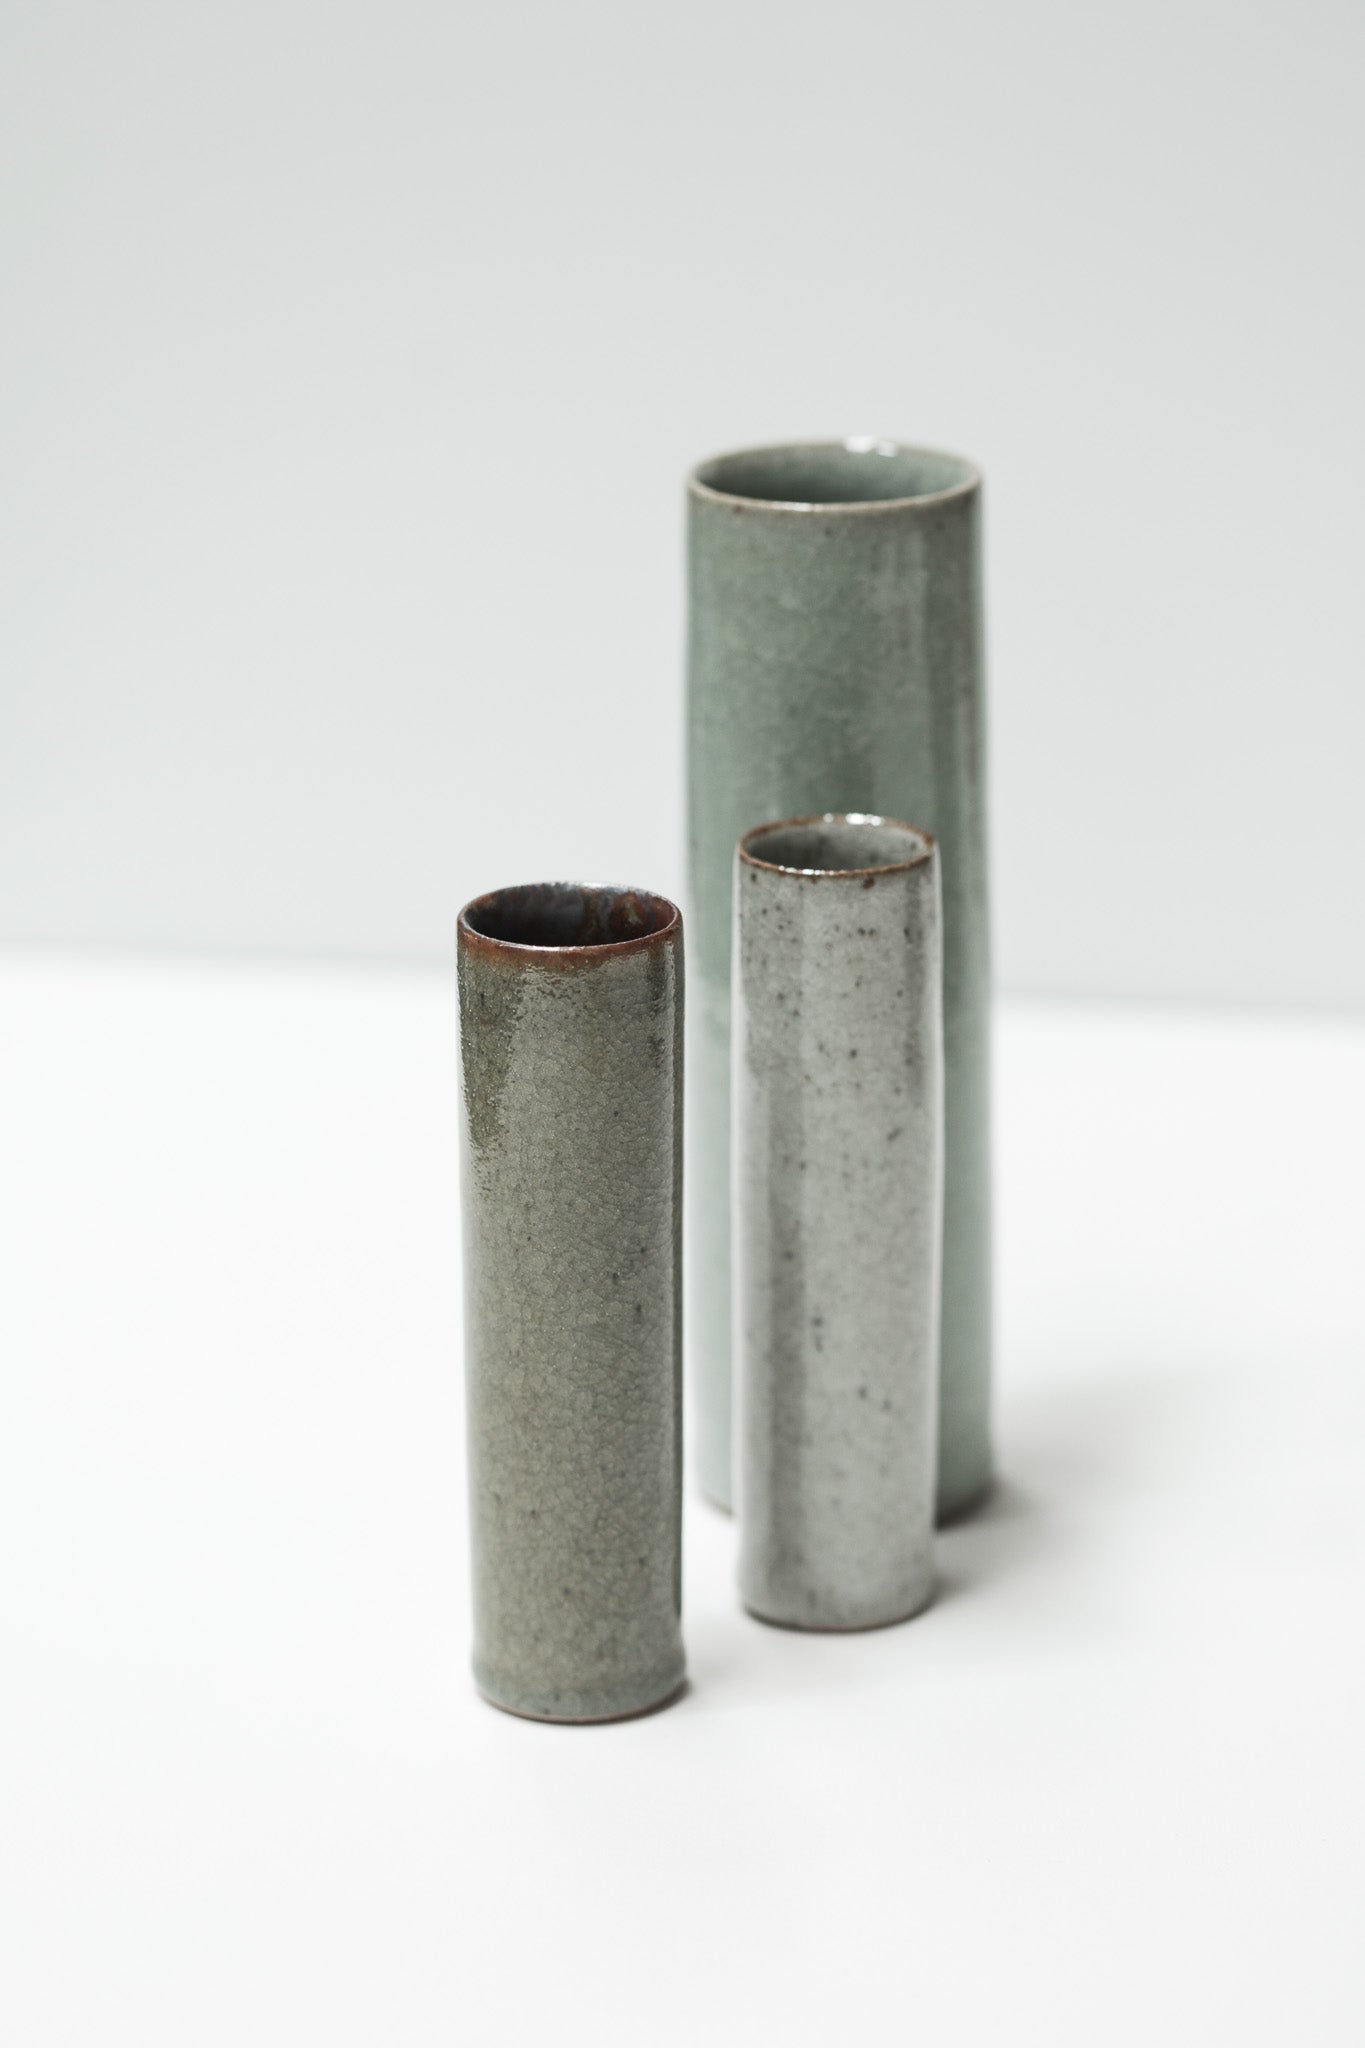 Florian Gadsby: Trio of Cylindrical Vases